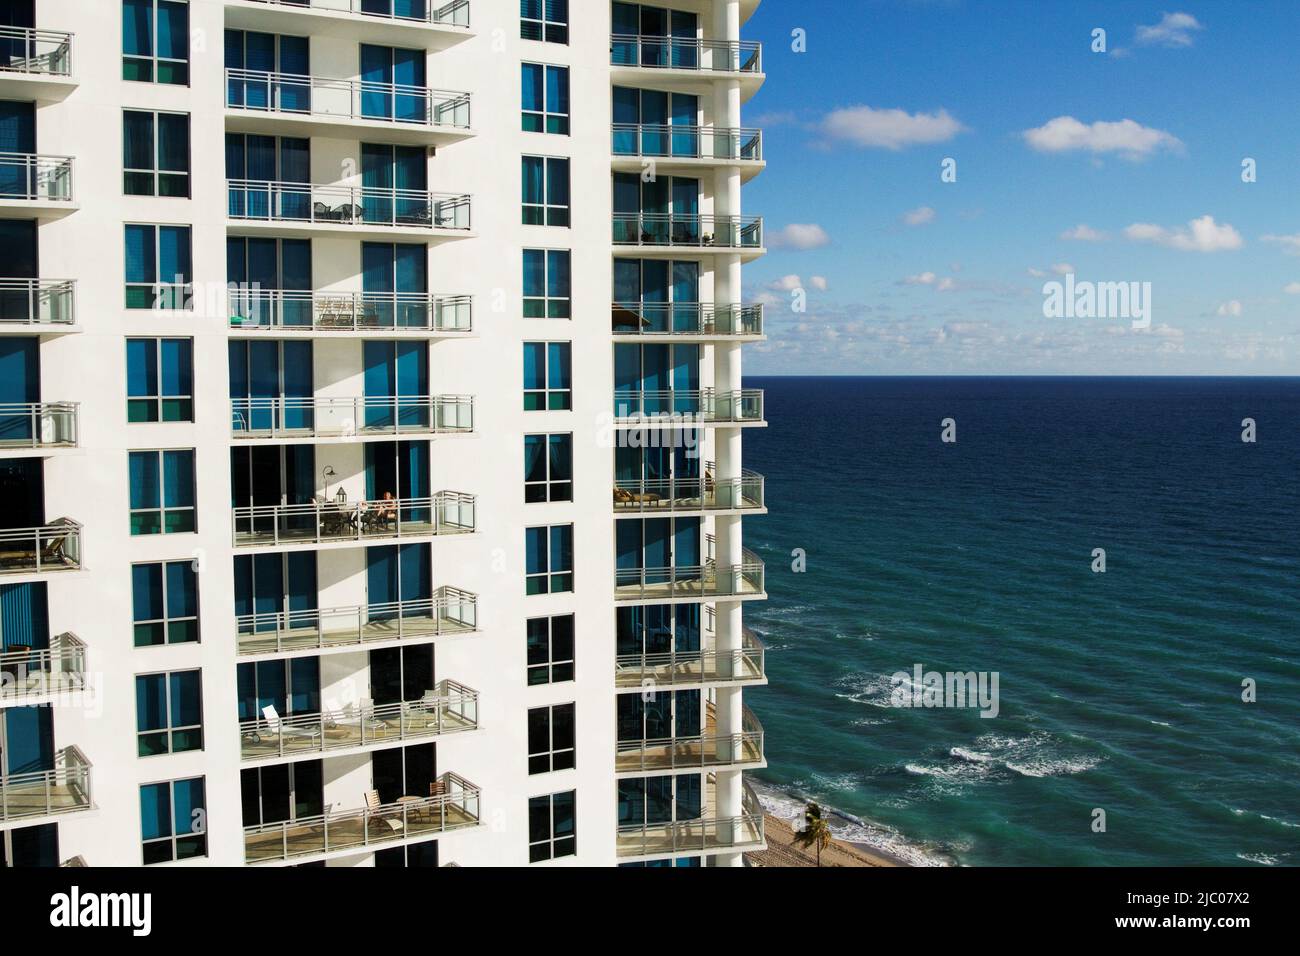 Balconies with a view of the ocean at the Diplomat Hotel, Hollywood, Broward County, Florida, USA Stock Photo